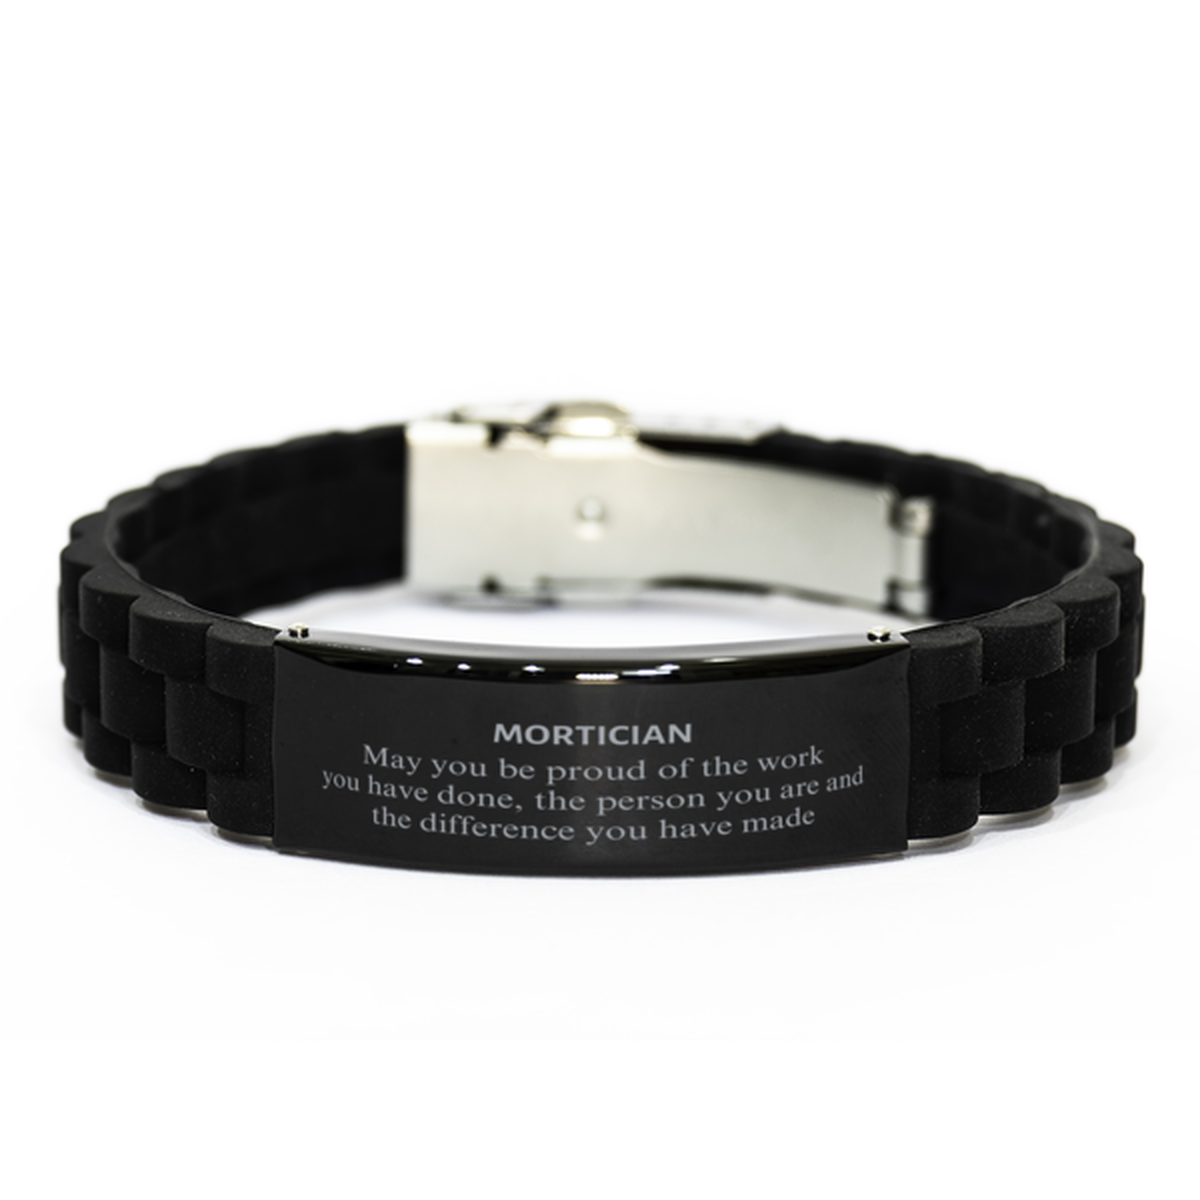 Mortician May you be proud of the work you have done, Retirement Mortician Black Glidelock Clasp Bracelet for Colleague Appreciation Gifts Amazing for Mortician